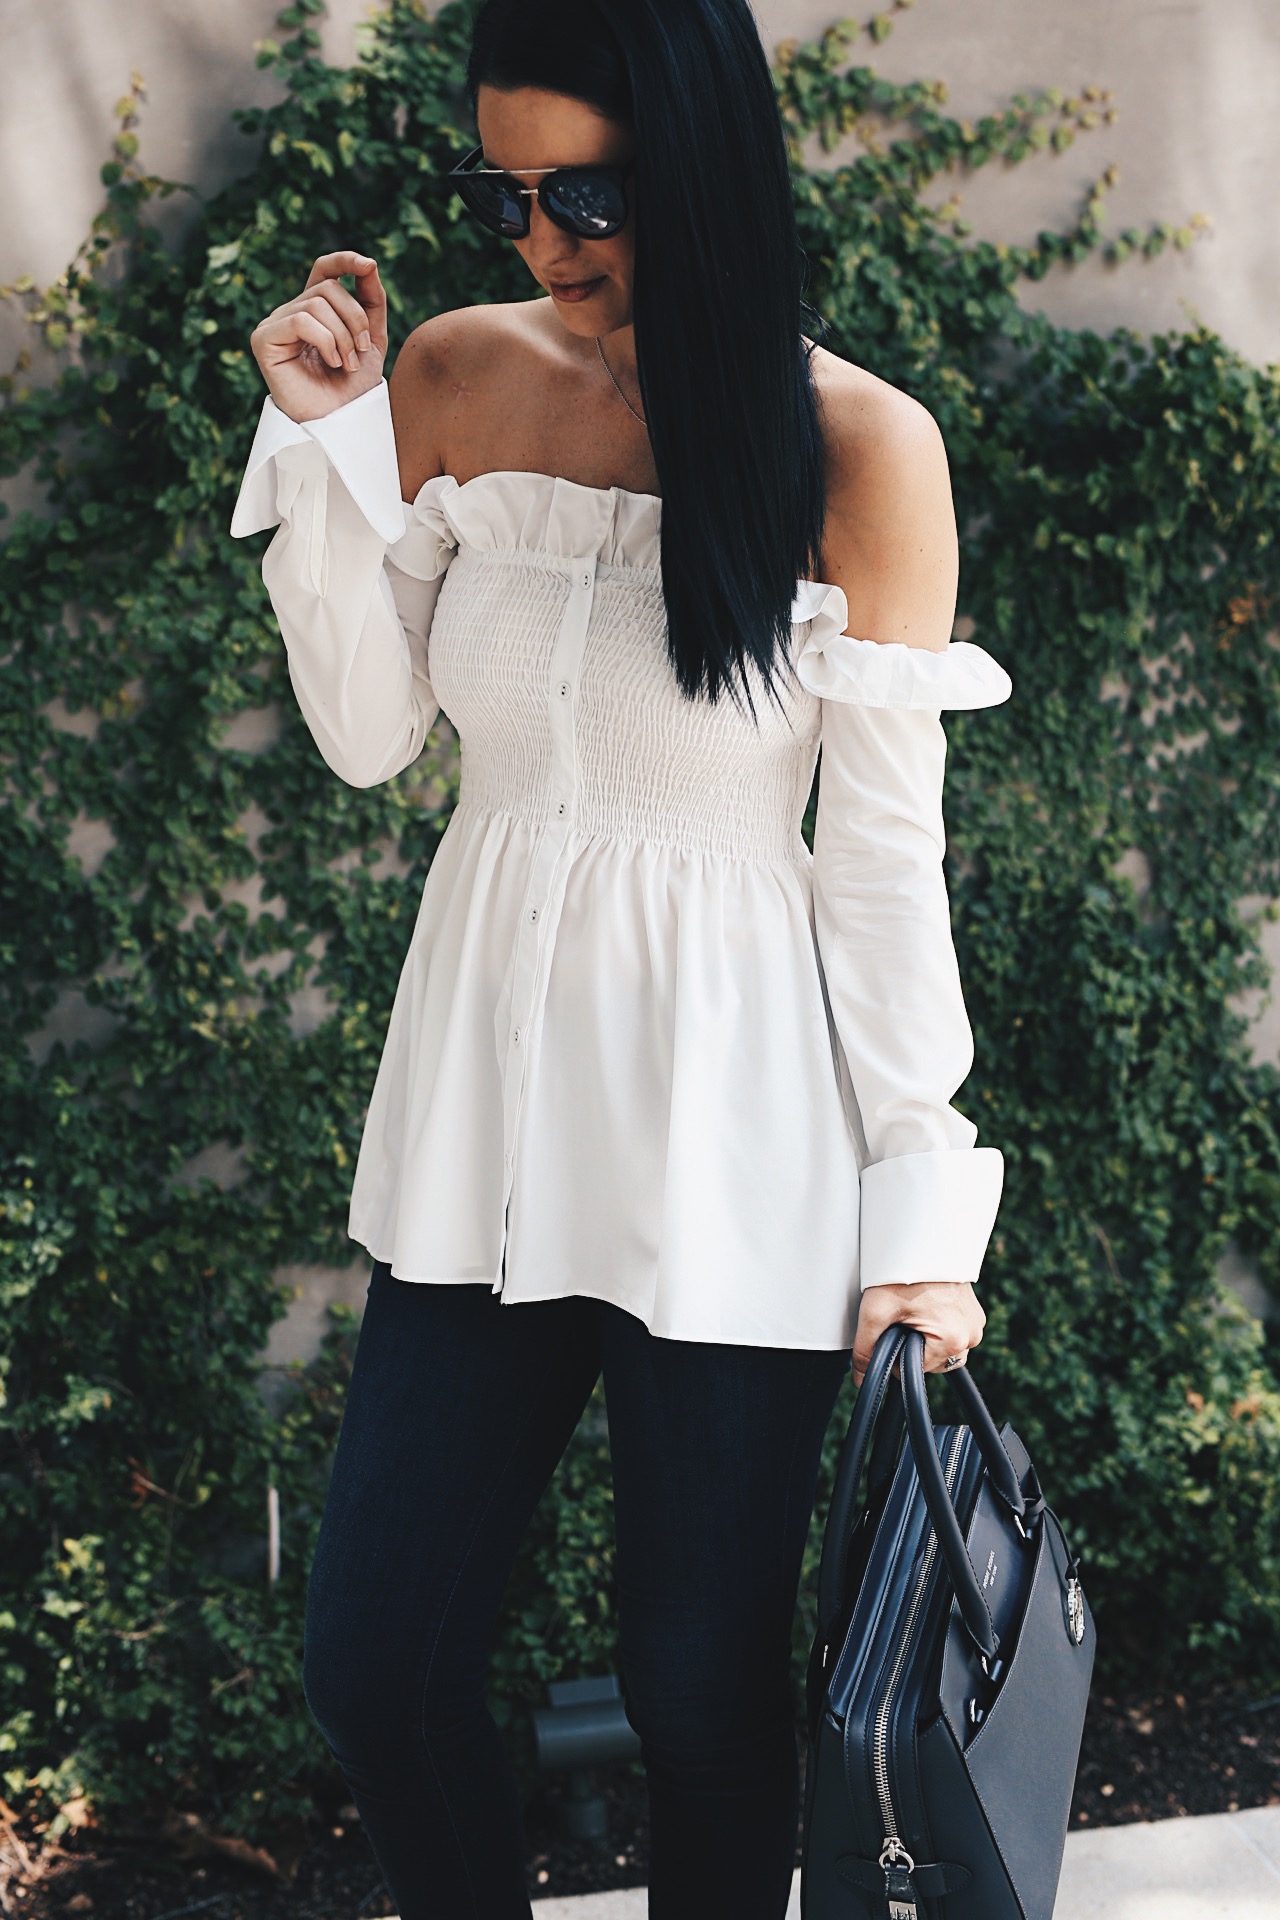 Austin Blogger DTKAustin shares why you should all be wearing white after labor day with Chicwish.